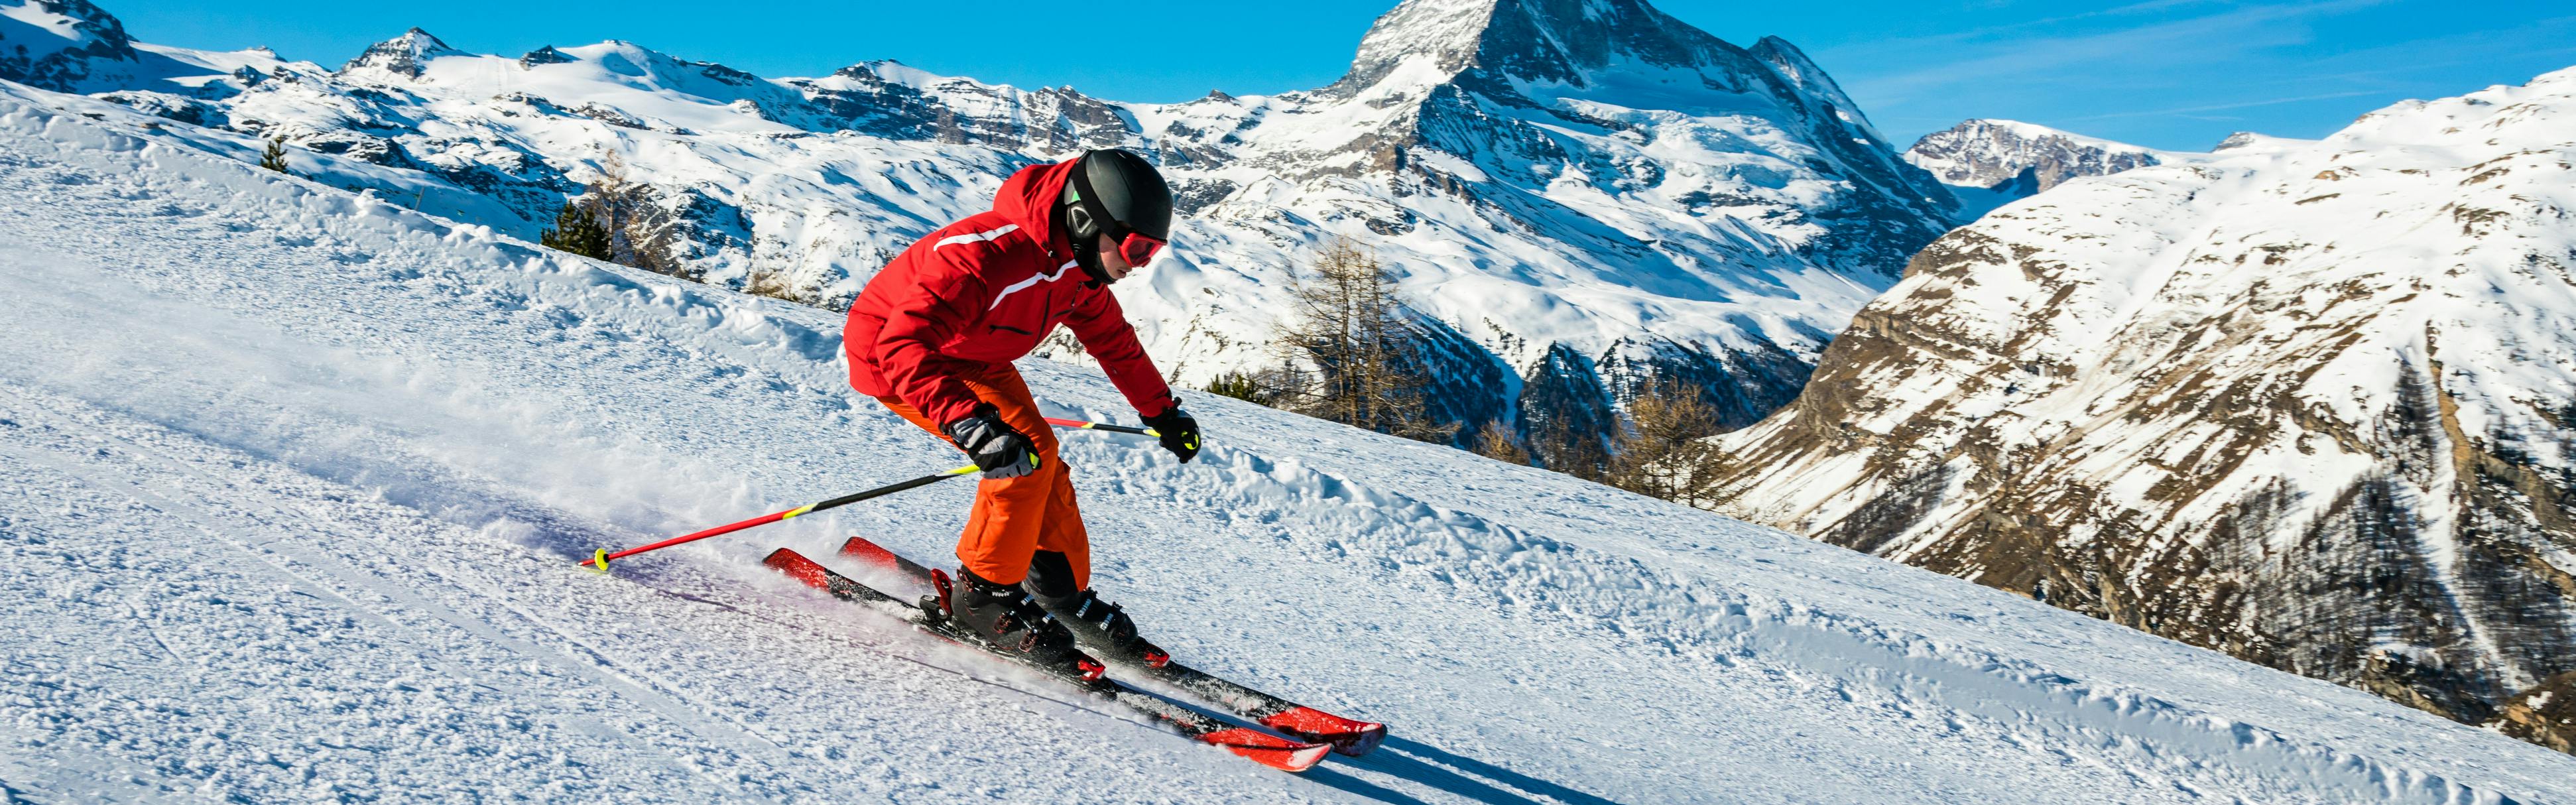 Skier skiing down a groomed slope